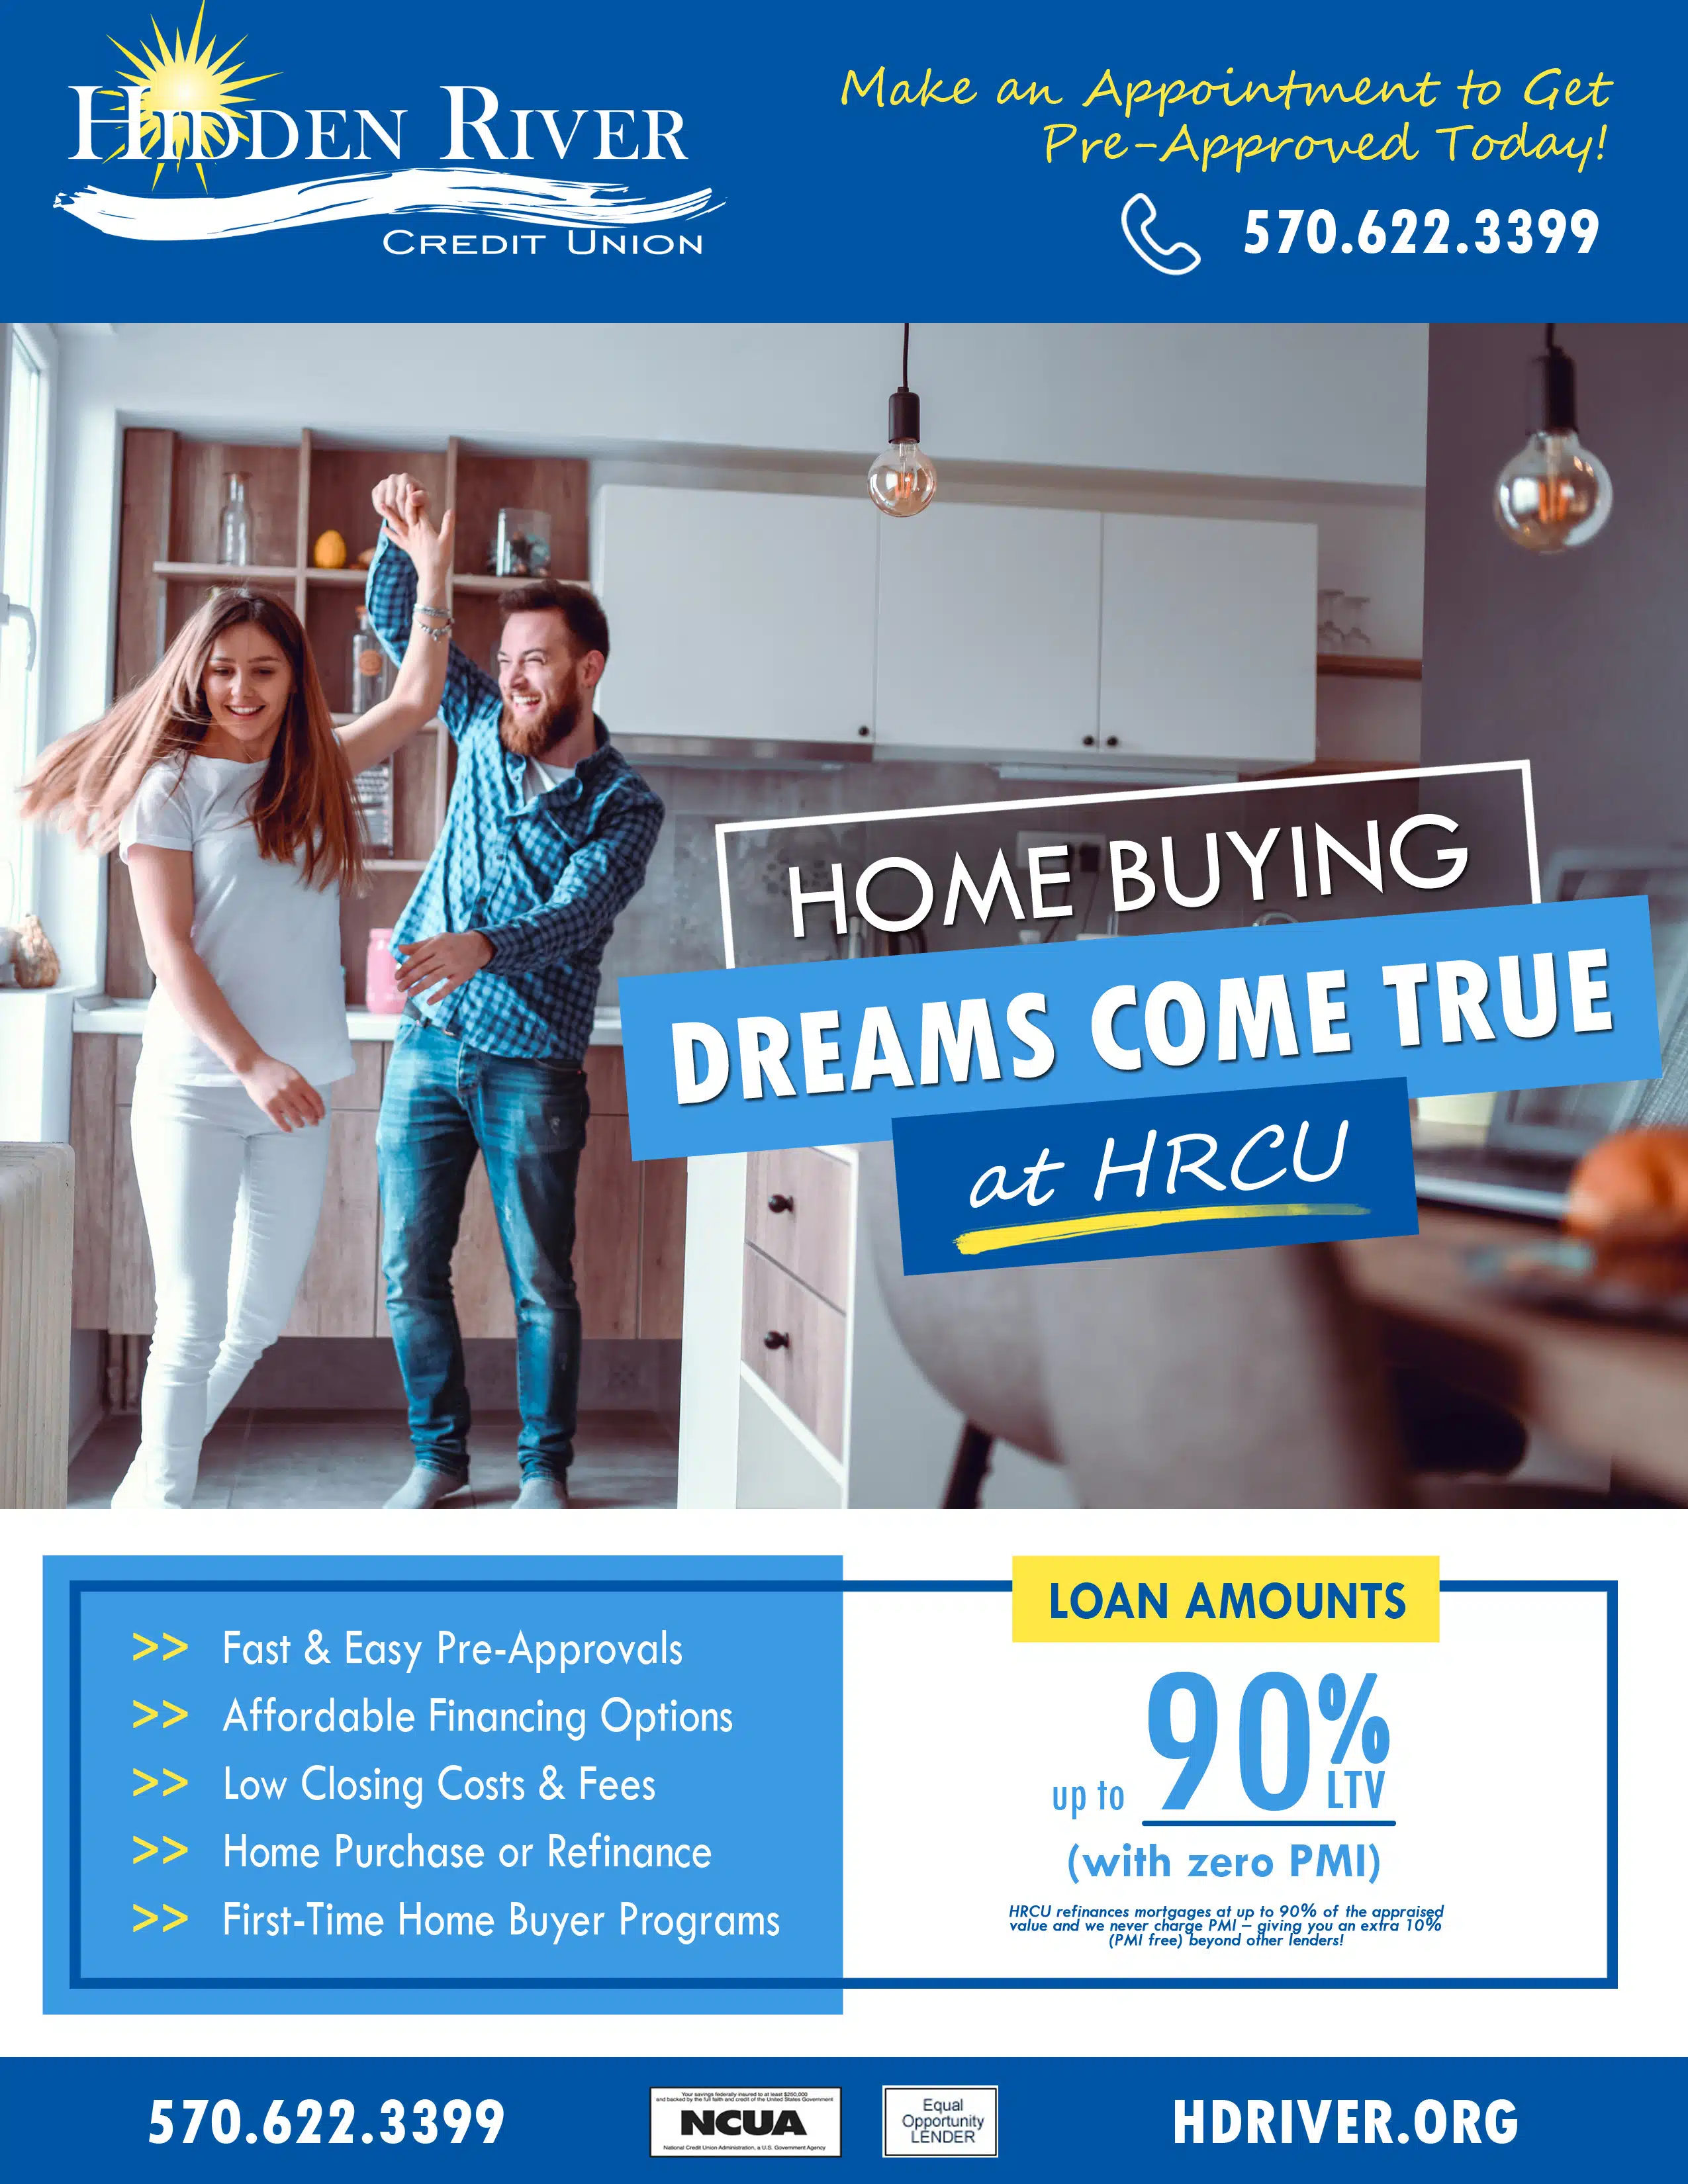 Flyer with guy and girl dancing in a kitchen with words "HOME BUYING" in a white border, "Dreams Come True" in white with a light blue box behind and "at HRCU" in white with a dark blue box behind and yellow paint-like underline. Dark blue boarder at top and bottom. Top includes while HRCU logo and "Make an Appointment to Get Pre-Approved Today!" in yellow and phone icon with white words "570.622.3399. Bottom border includes "570.622.3399, HDRIVER.ORG" and the NCUA and EOL logos. Promotional text also states "Loan Amounts up to 90% LTV (with zero PMI), Fast & Easy Pre-Approvals, Affordable Financing Options, Low Closing Costs & Fees, Home Purchase or Refinance, First-Time Home Buyer Programs."